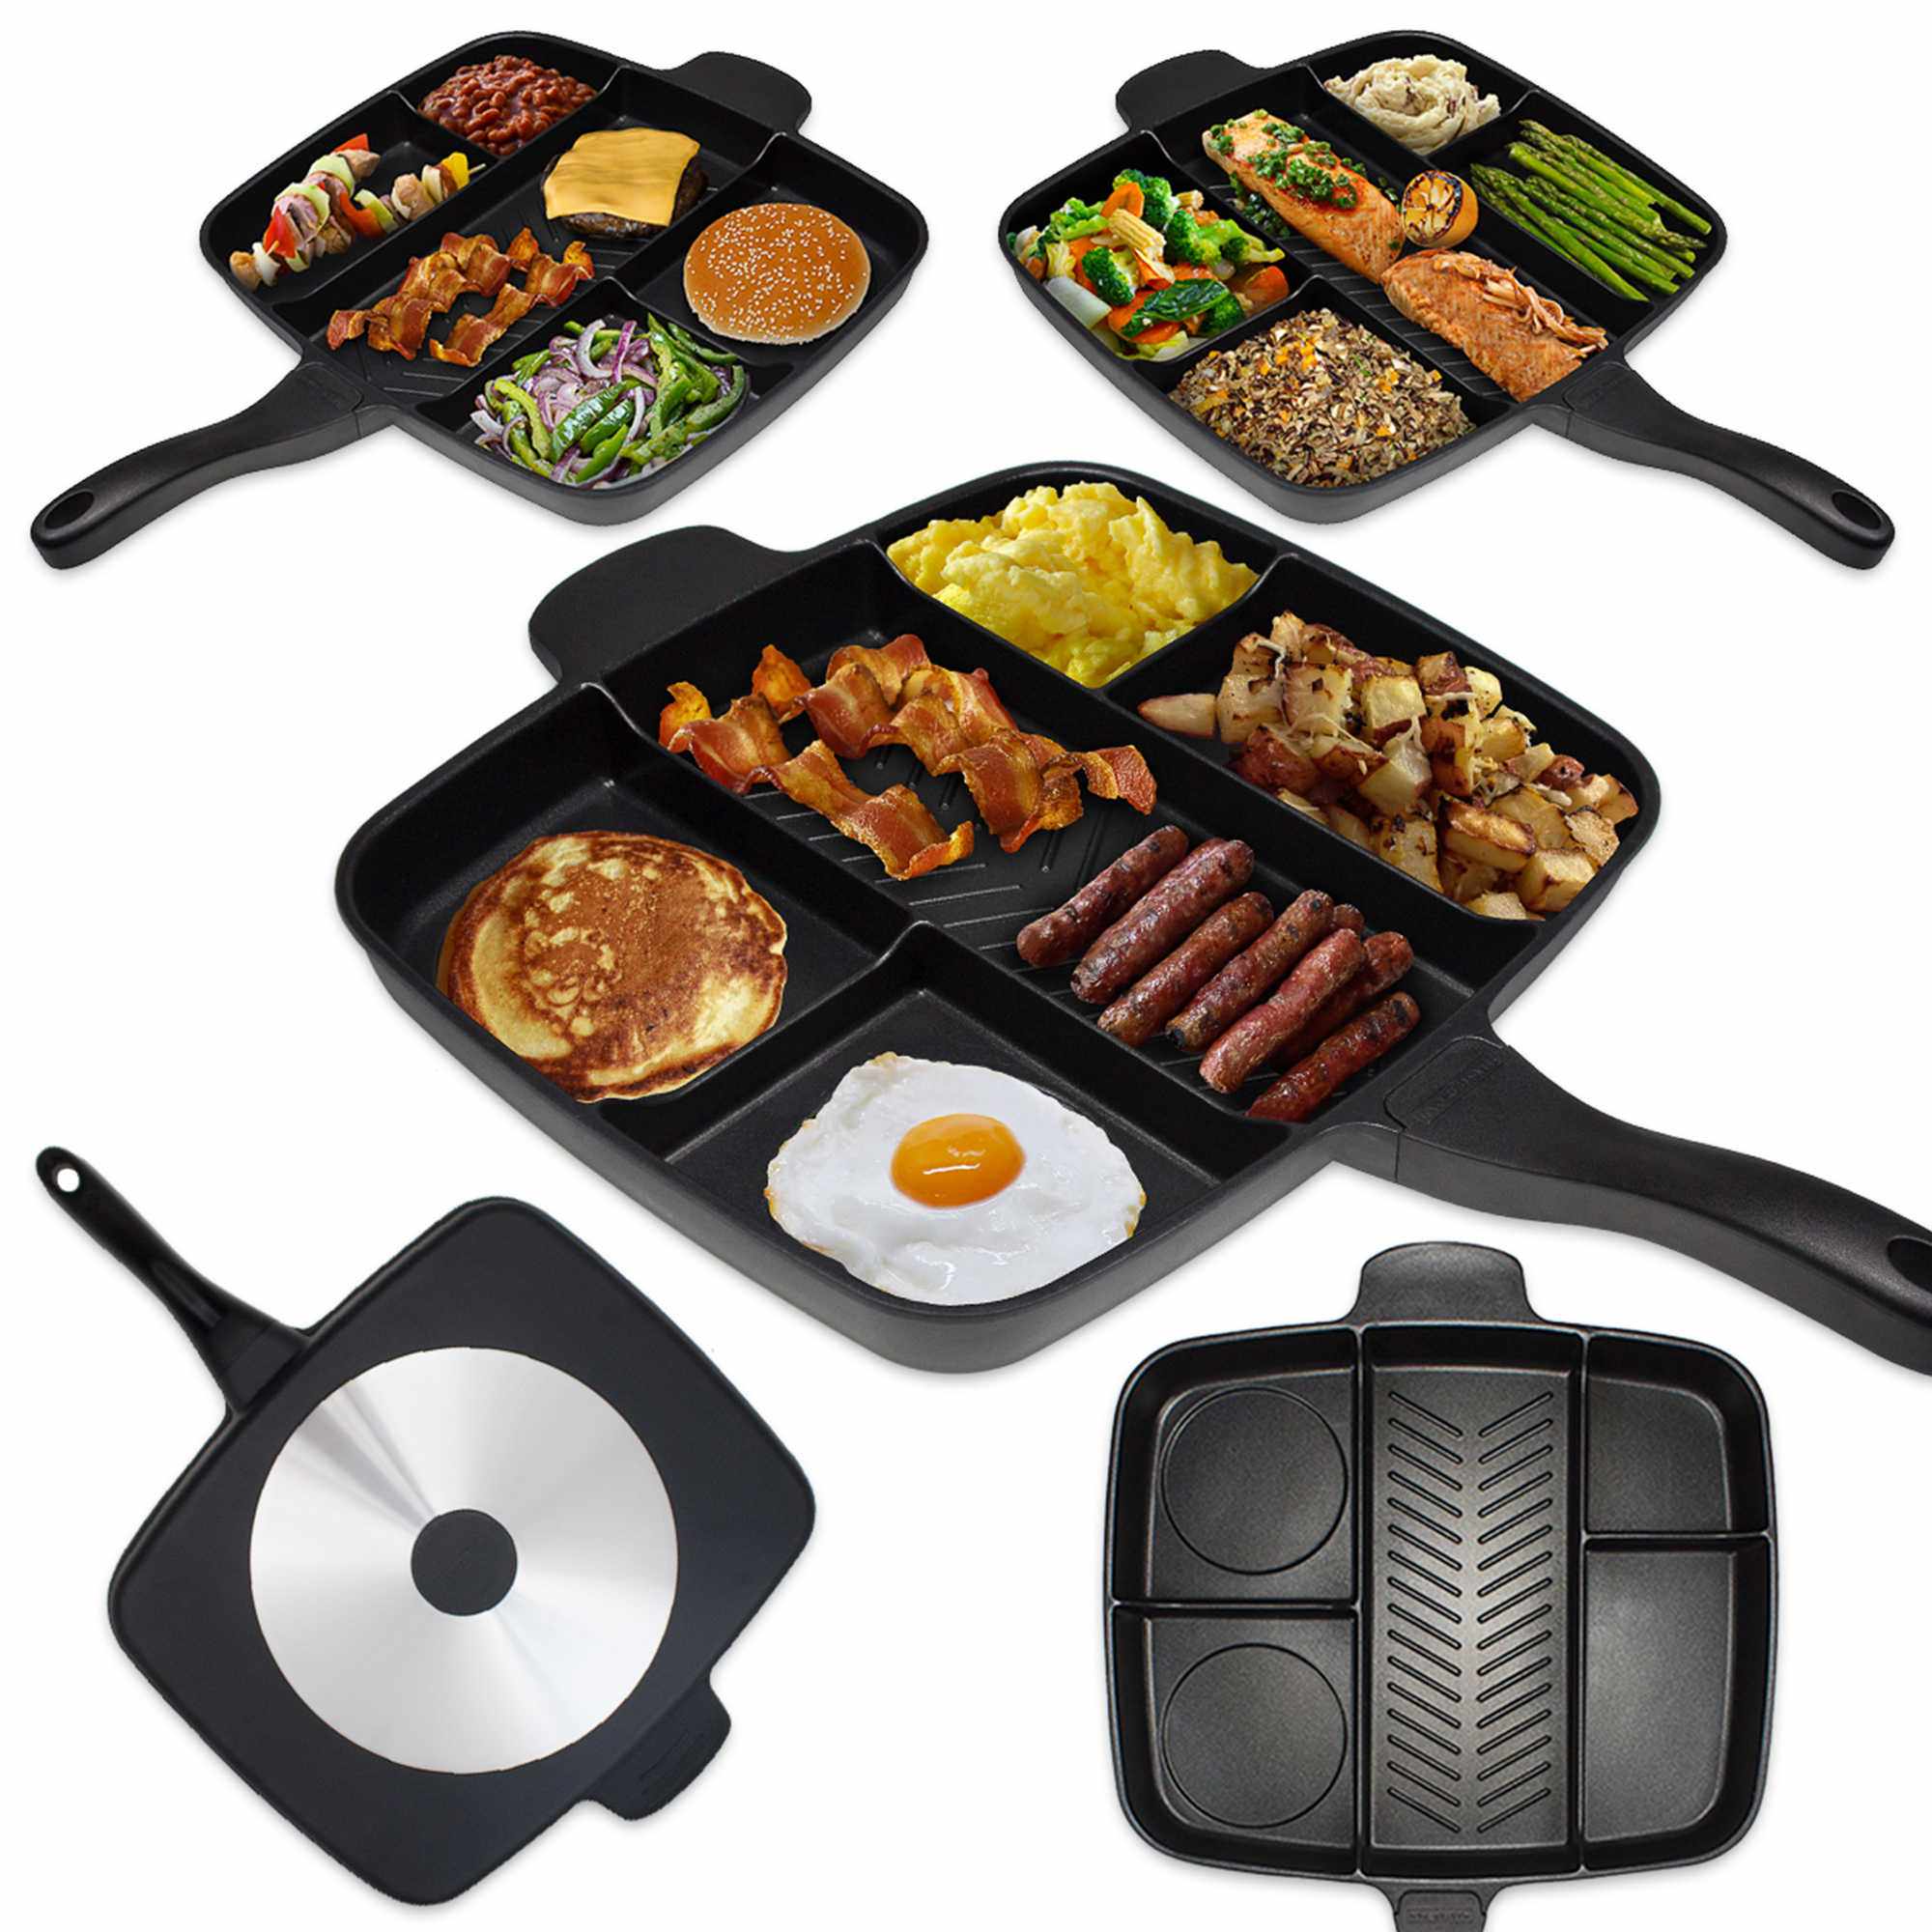 A Full Camping Breakfast, One Single Pan